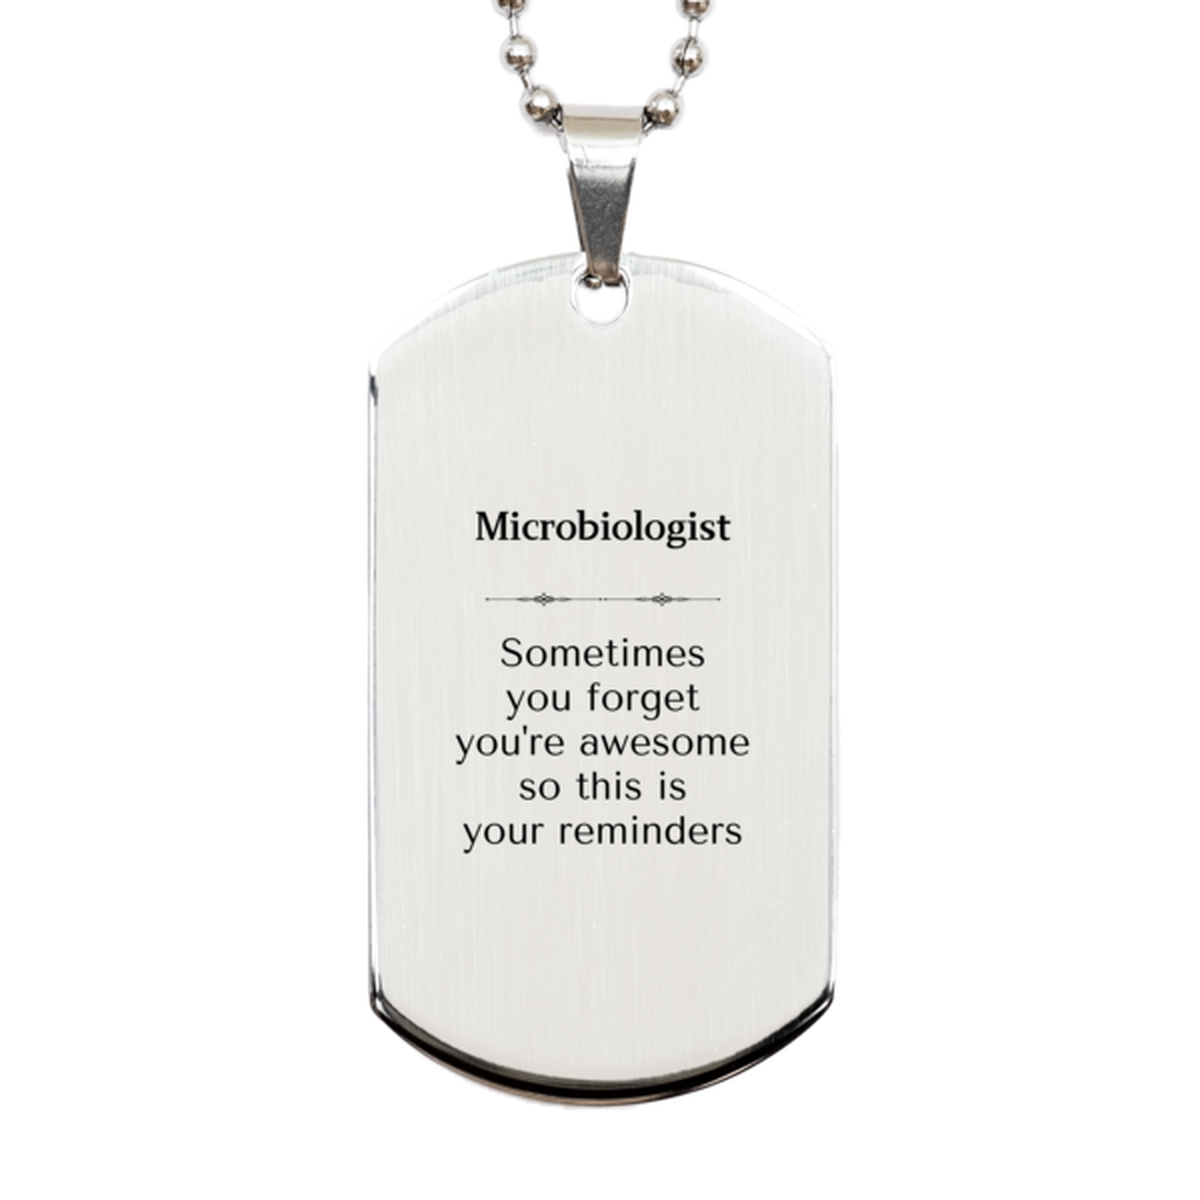 Sentimental Microbiologist Silver Dog Tag, Microbiologist Sometimes you forget you're awesome so this is your reminders, Graduation Christmas Birthday Gifts for Microbiologist, Men, Women, Coworkers